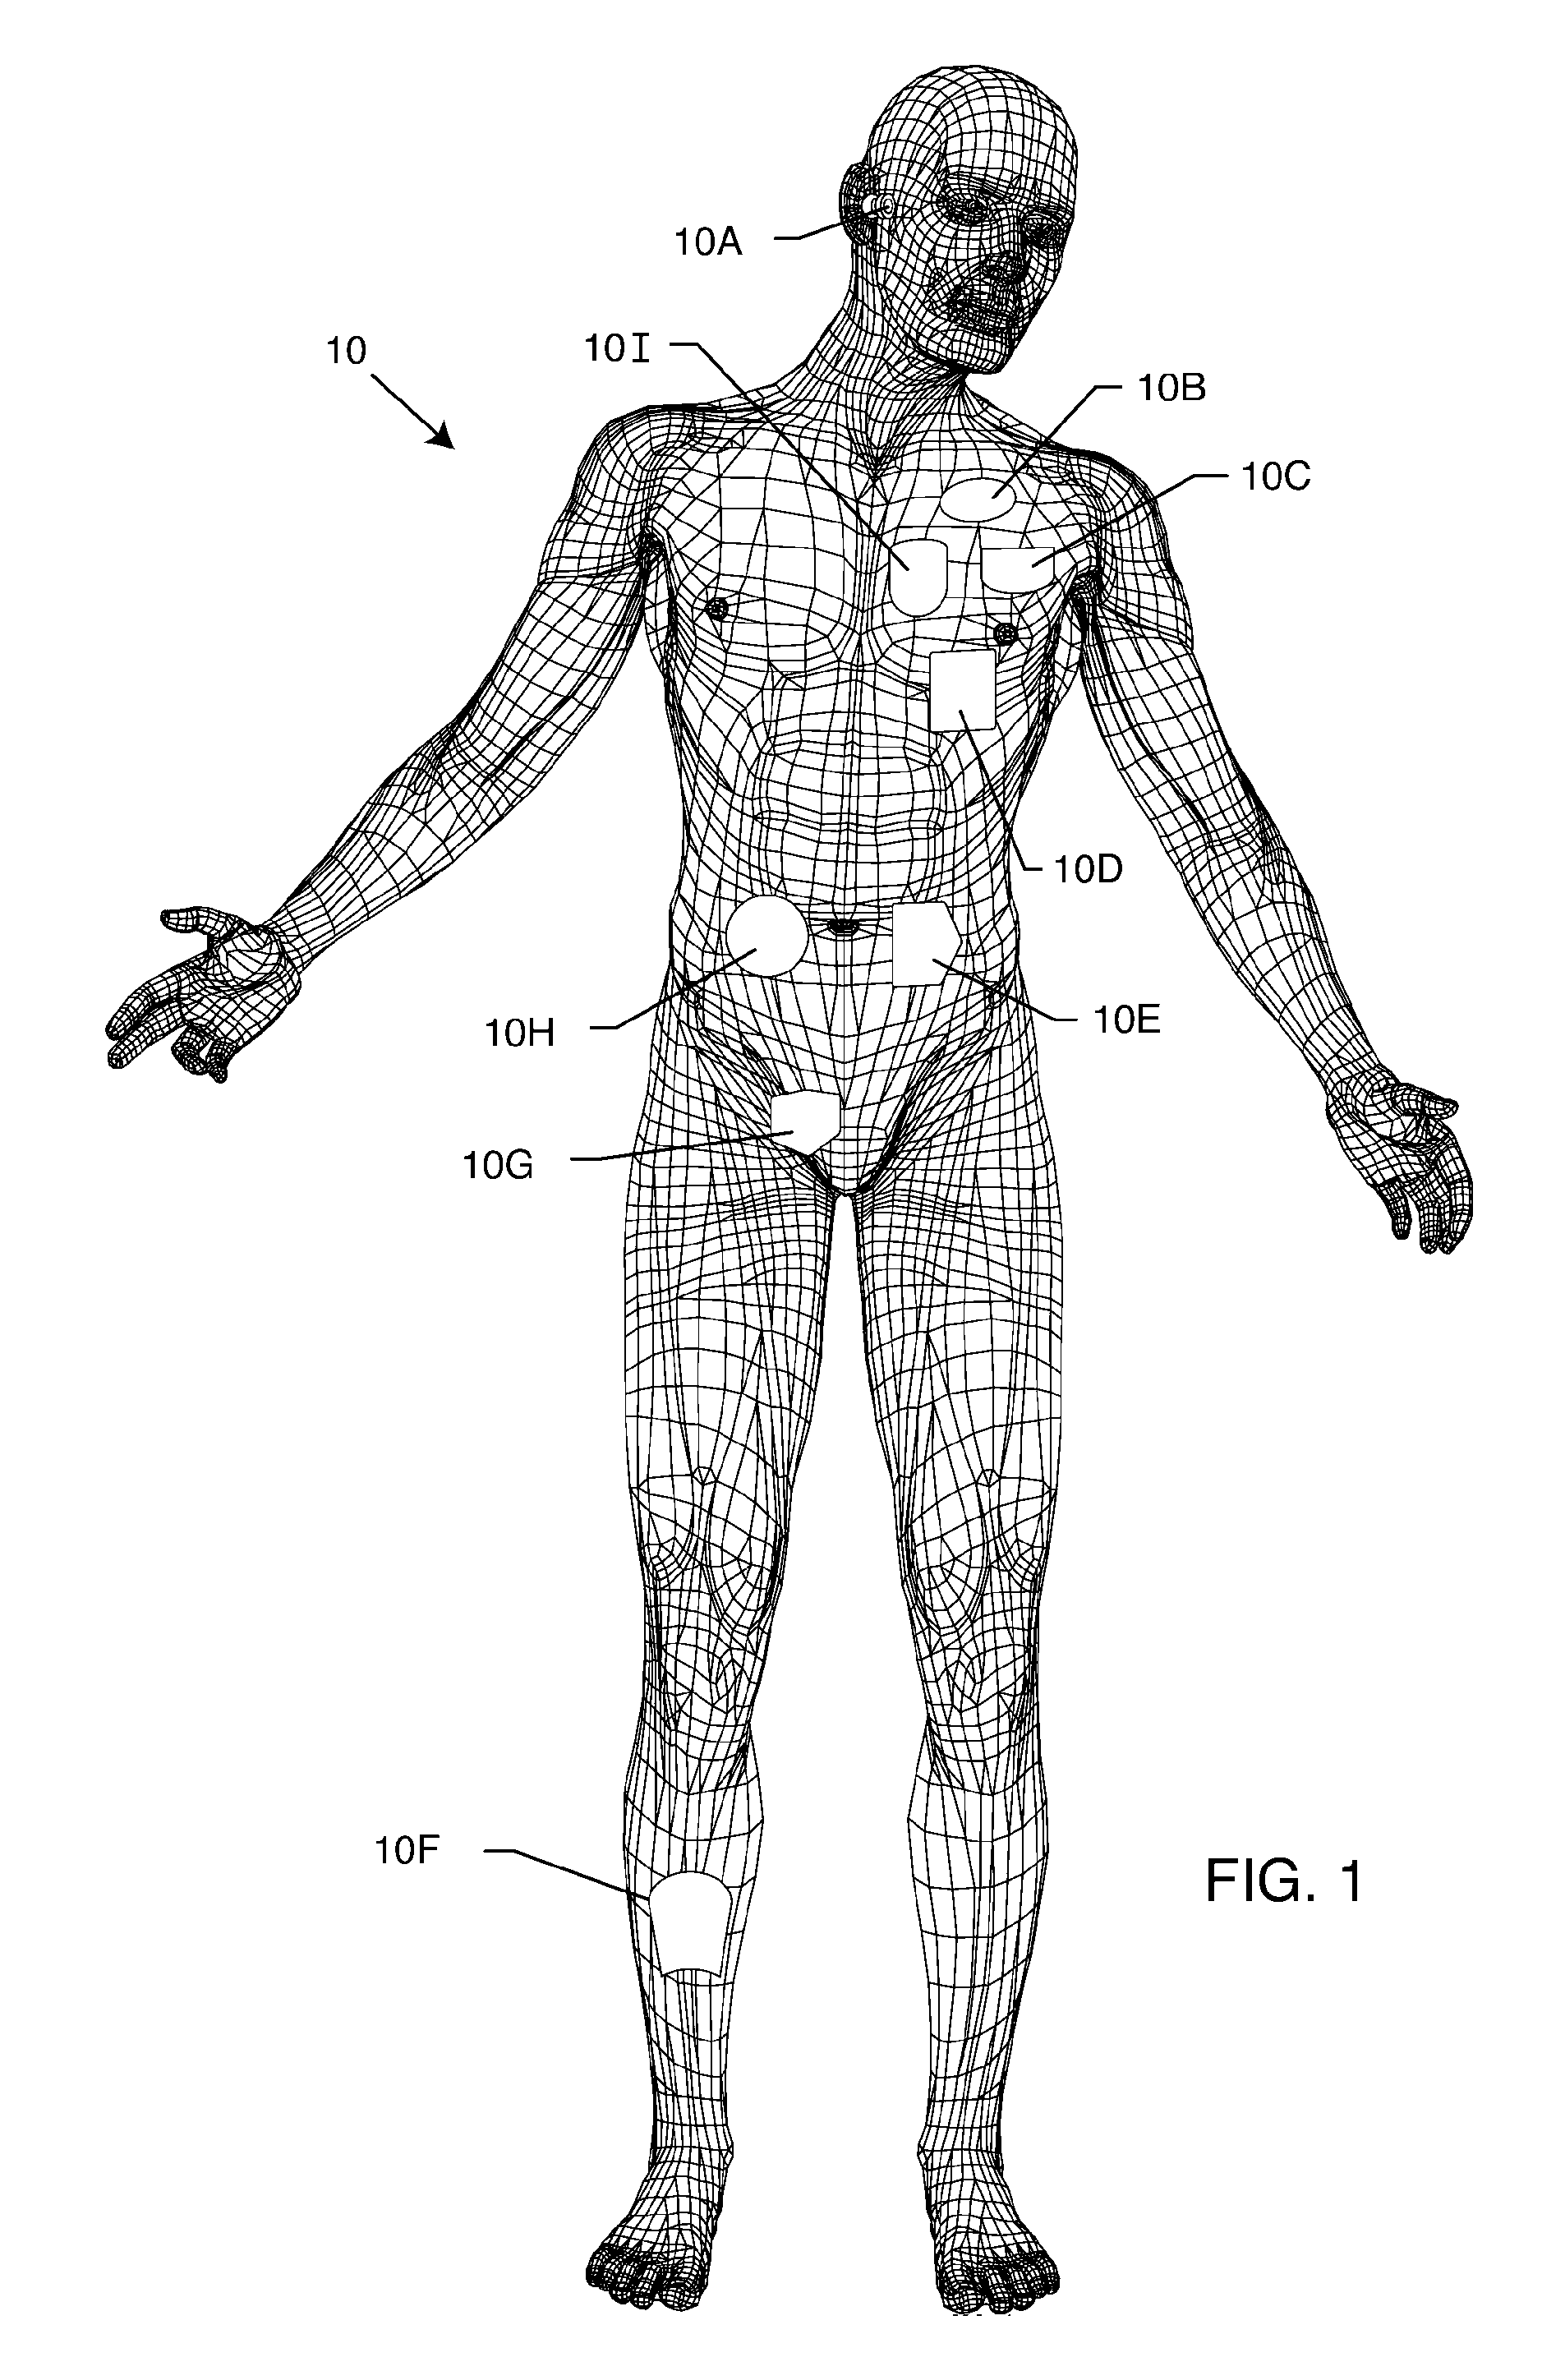 Device to protect an active implantable medical device feedthrough capacitor from stray laser weld strikes, and related manufacturing process